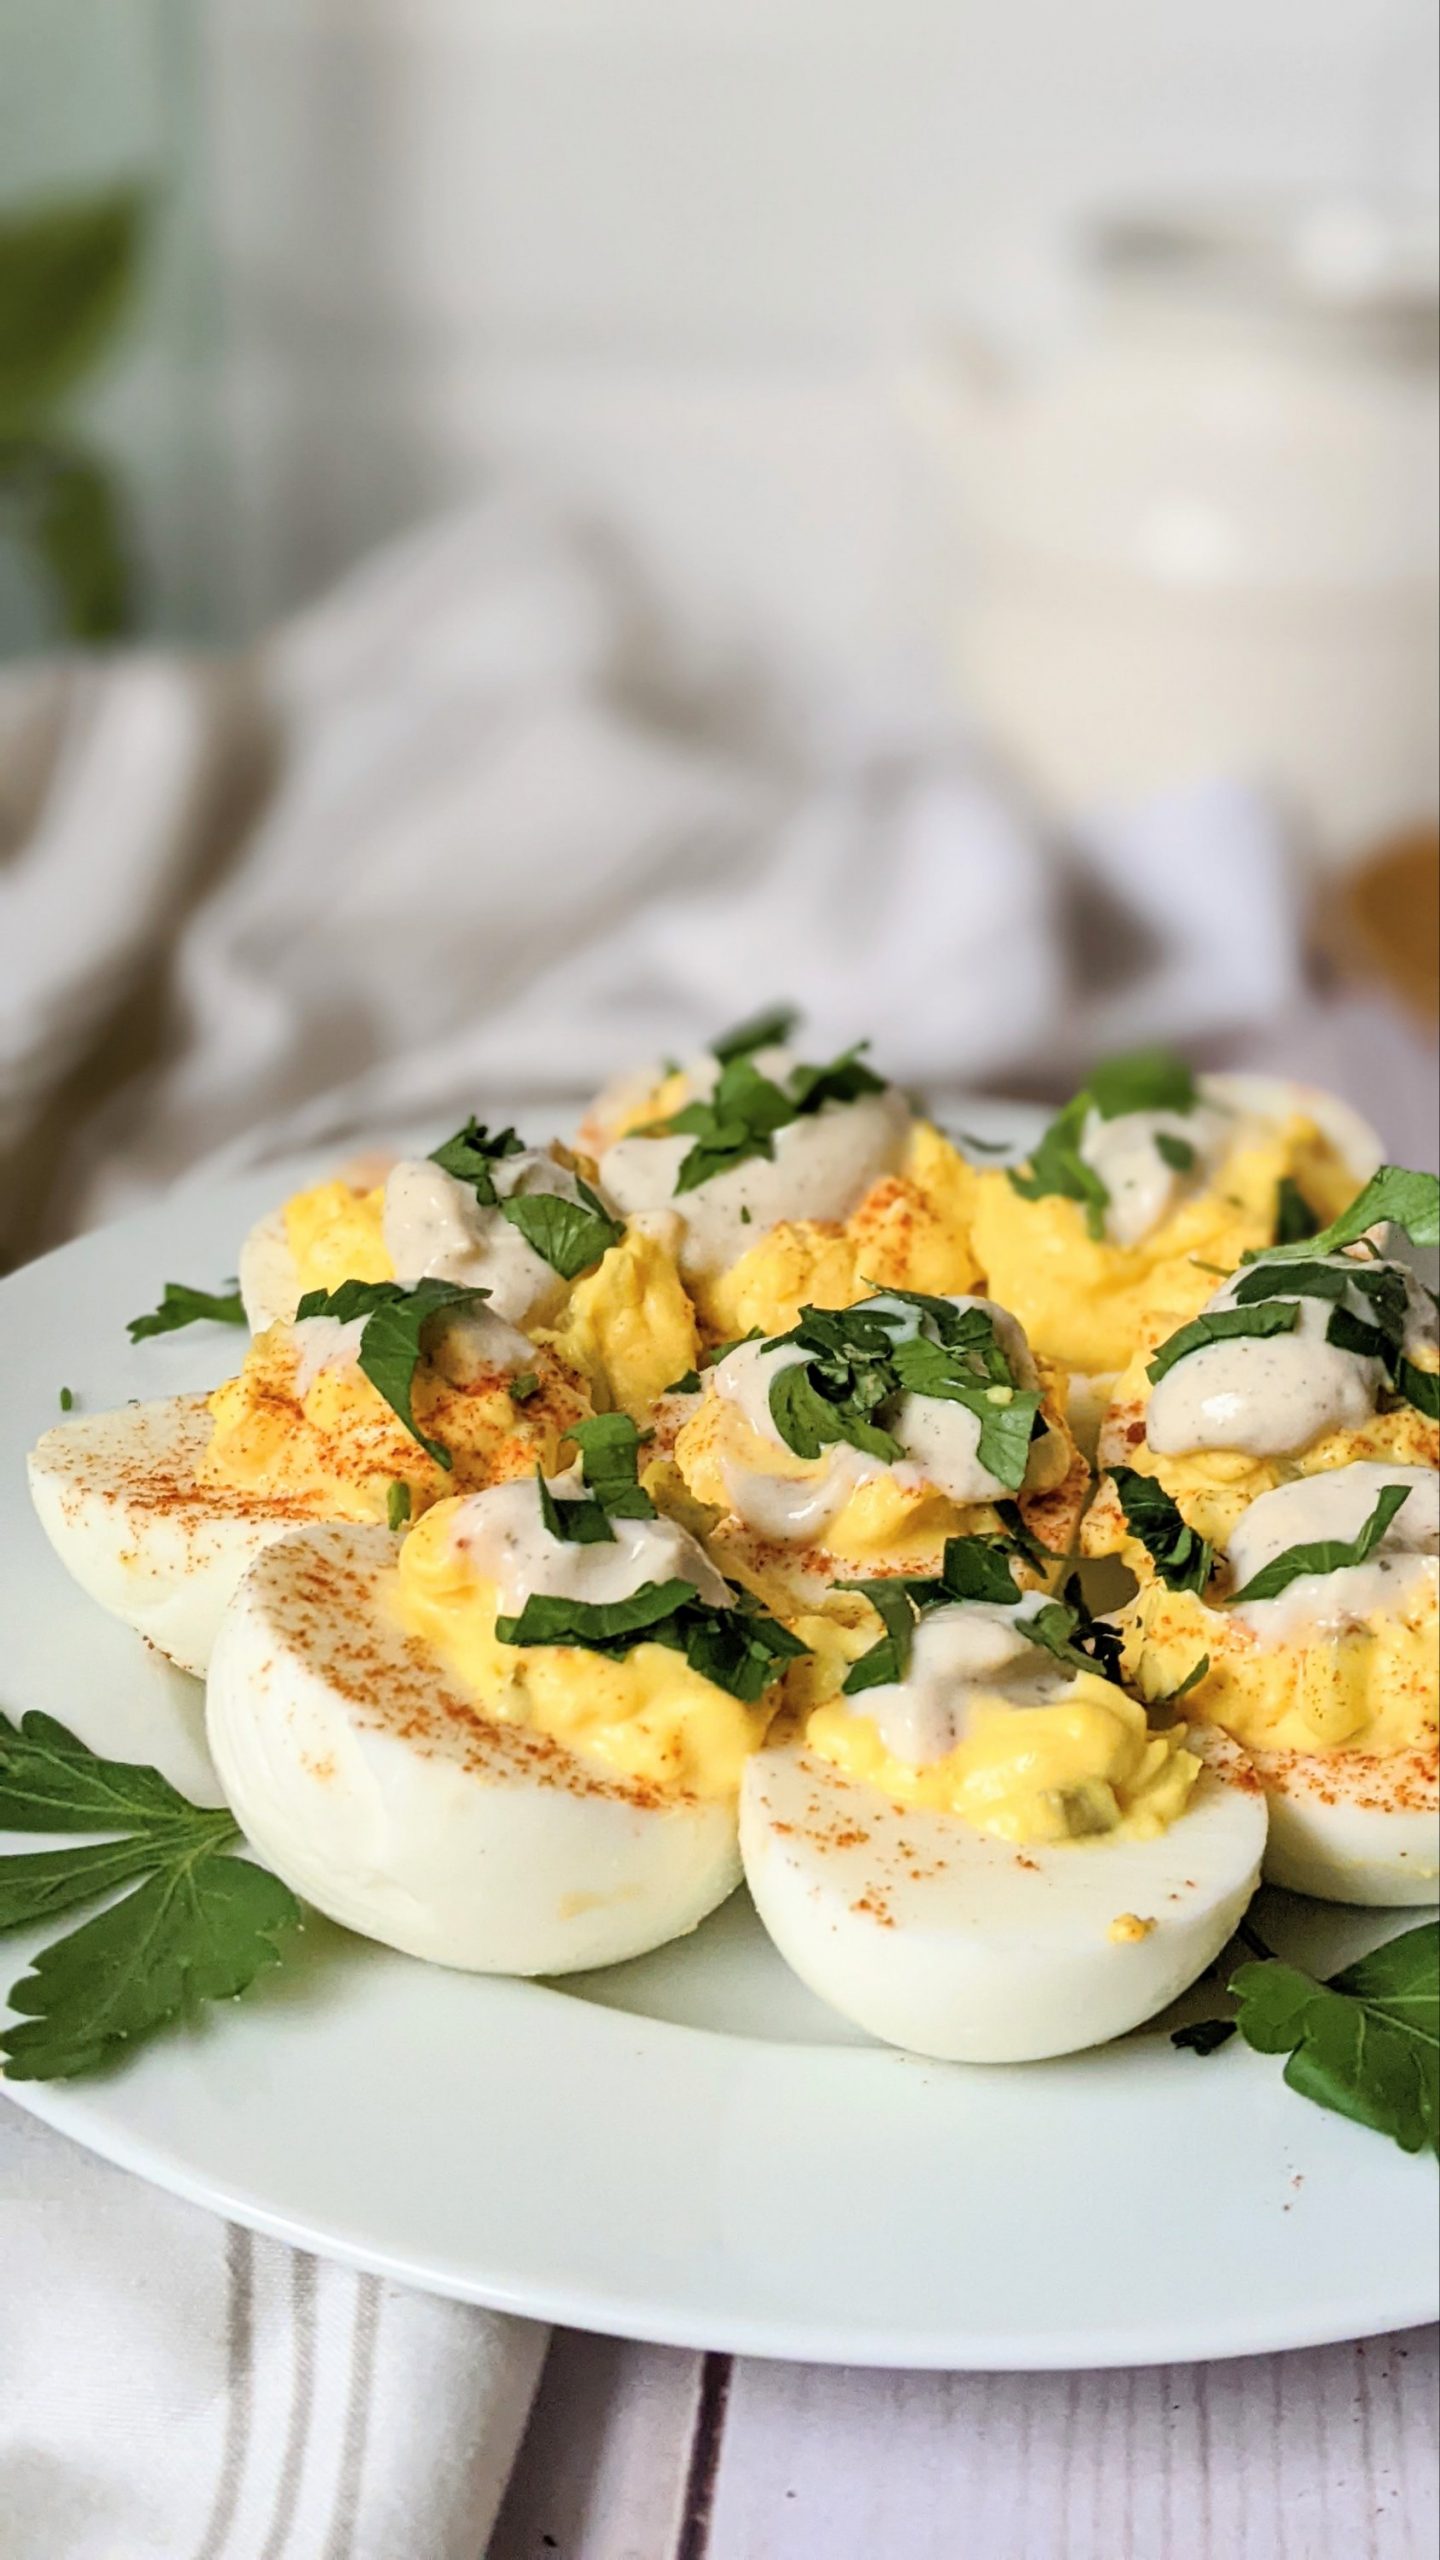 deviled ranch eggs recipe can i make deviled eggs with ranch dressing instead of mayo no mayonnaise deviled eggs herby parsley and greens